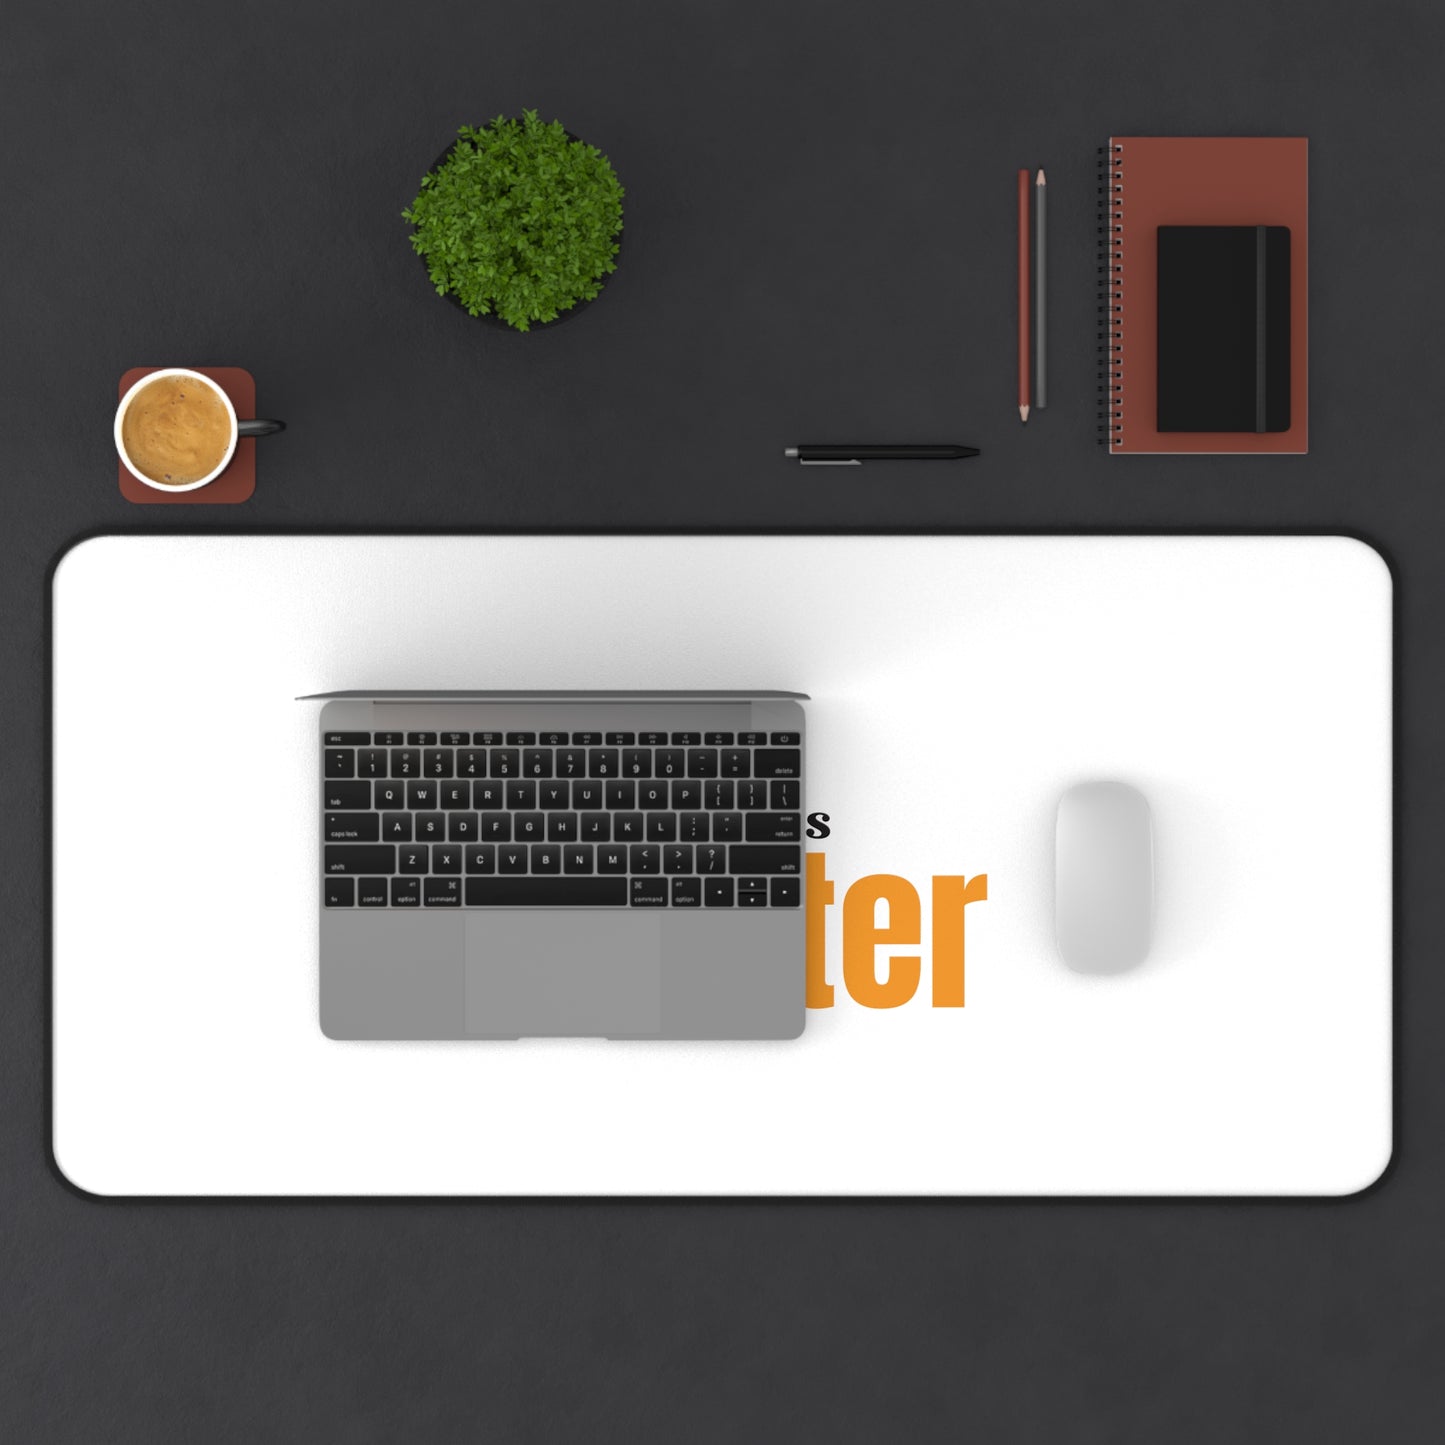 God Is Greater Christian Computer Keyboard Mouse Desk Mat